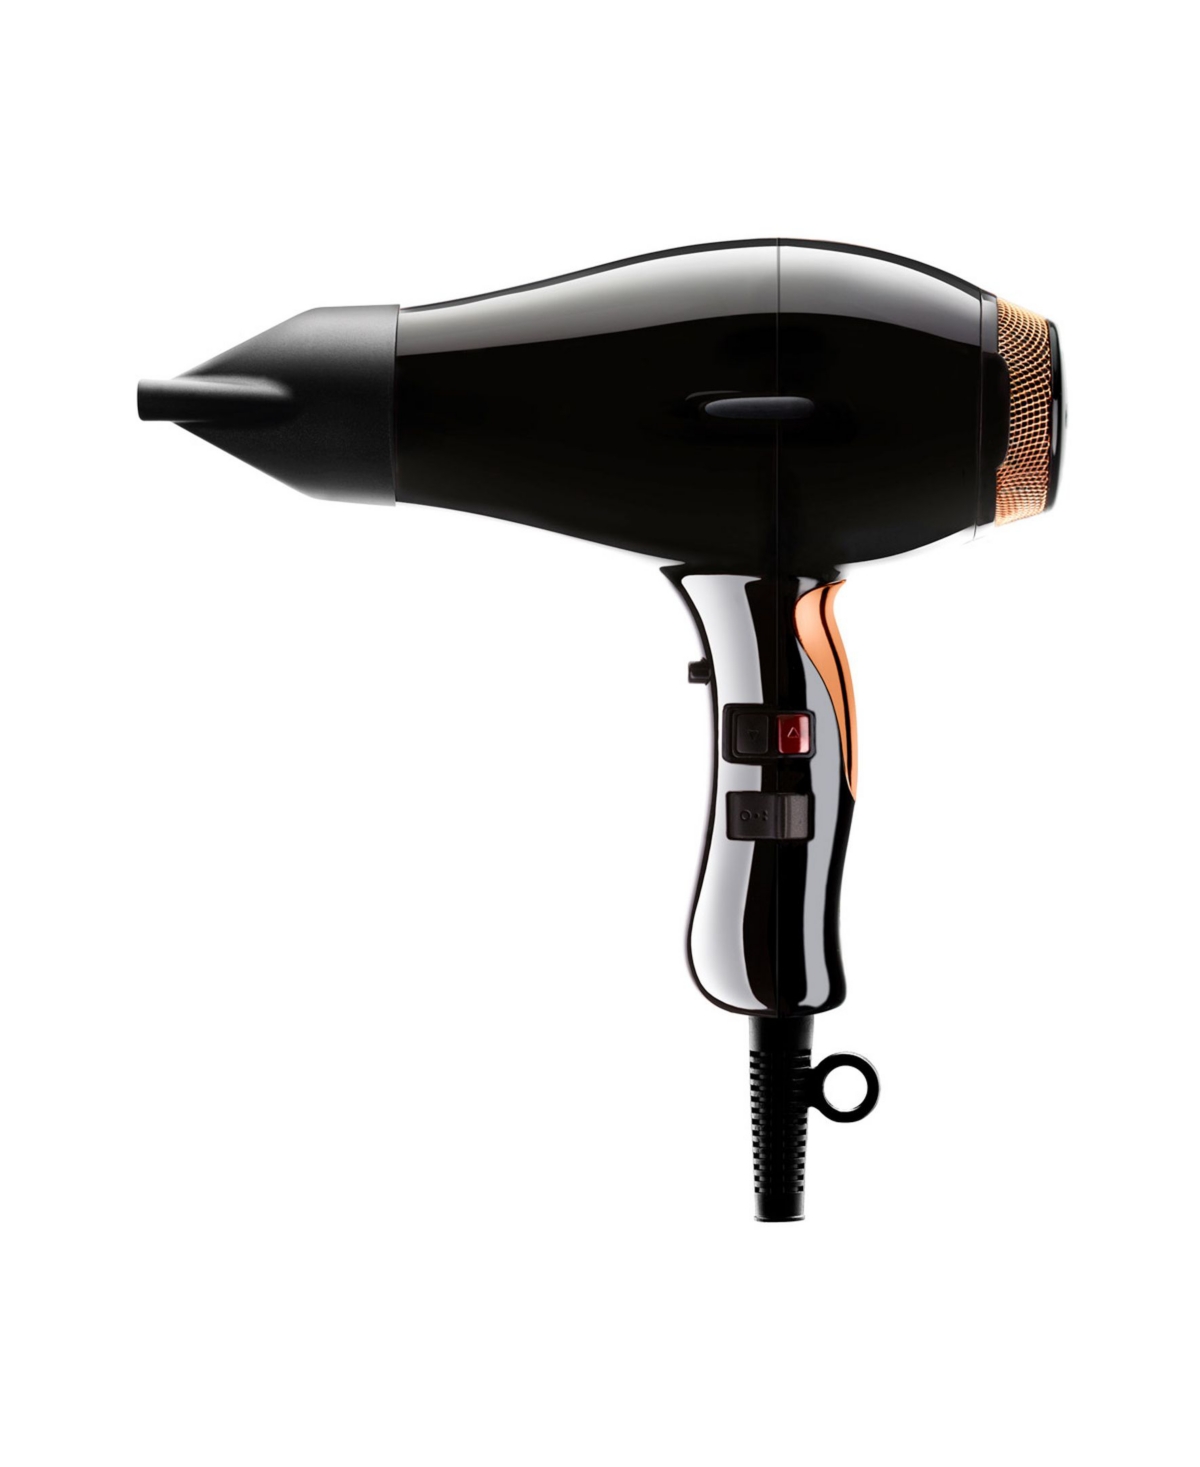 8th Sense Sunset Copper Dryer with Diffuser - Black